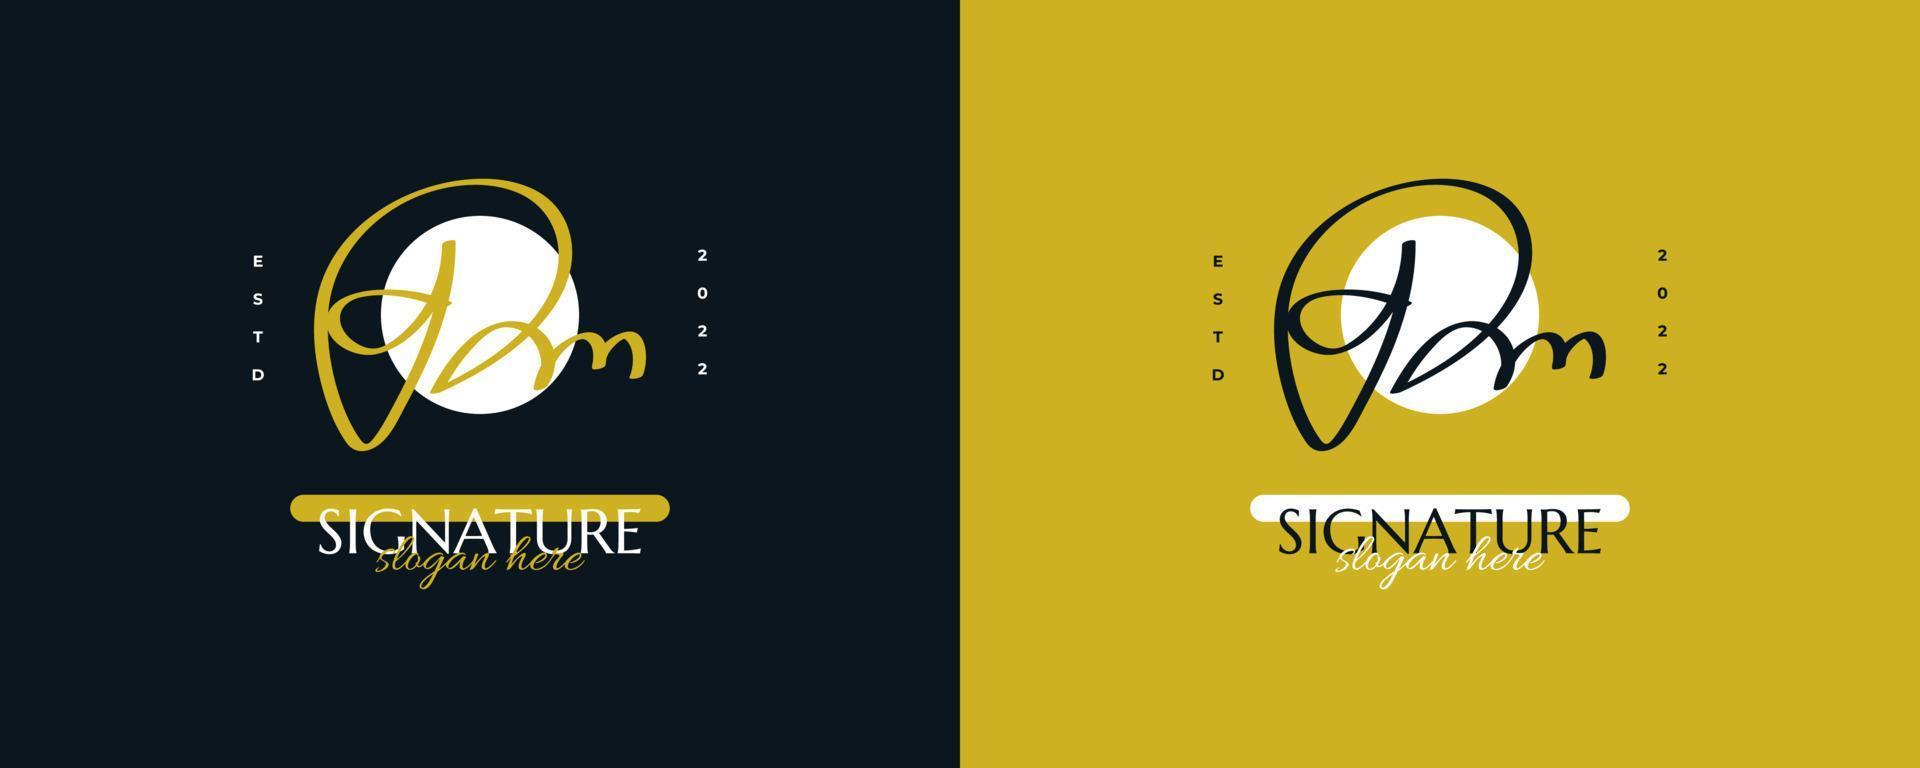 Initial D and M Logo Design with Elegant and Minimalist Handwriting Style. DM Signature Logo or Symbol for Wedding, Fashion, Jewelry, Boutique, and Business Identity vector